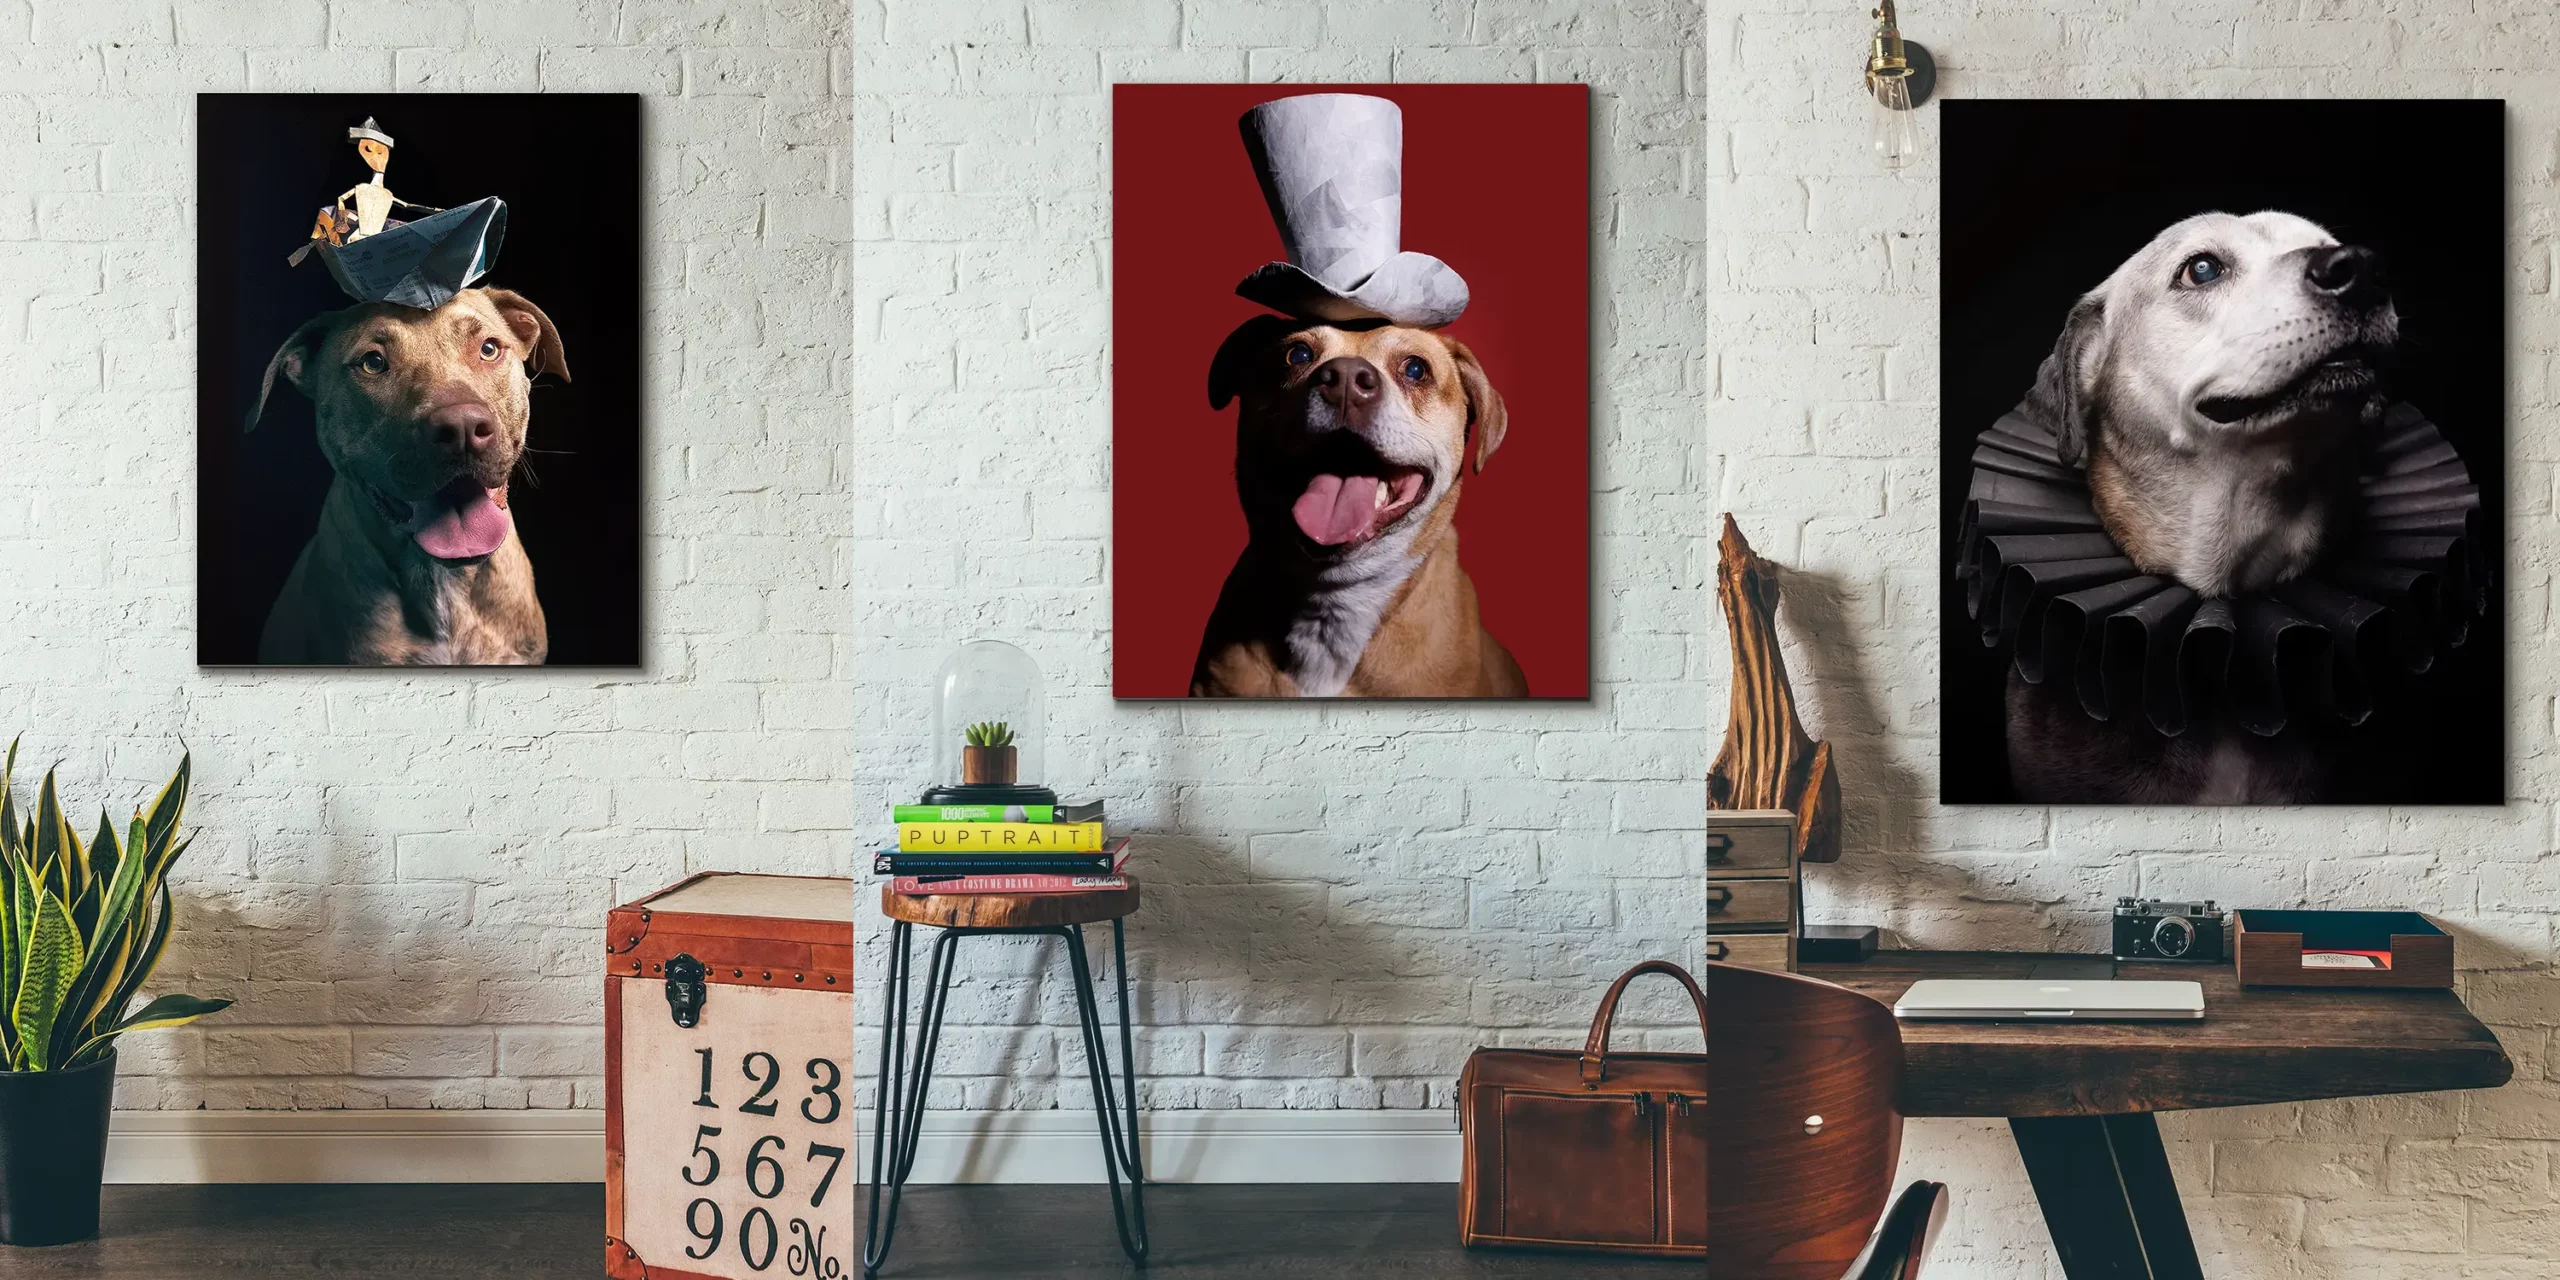 Creative photographic portrait art of happy dogs wearing costumes, photographed at the Puptrait Studio located just minutes from Annapolis, Maryland